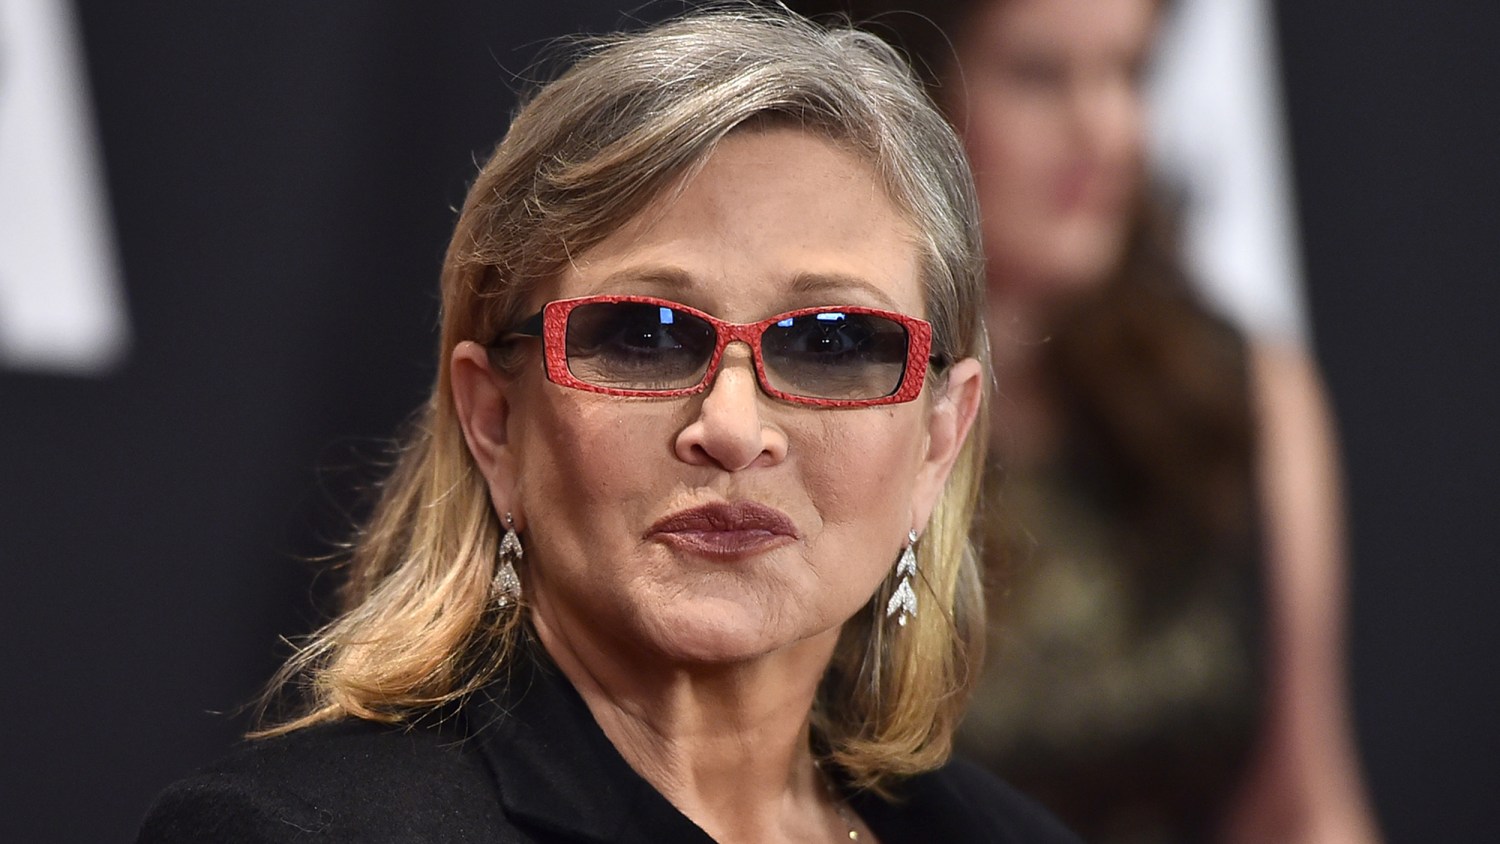 Carrie Fisher sent a cow tongue to producer who assaulted her friend